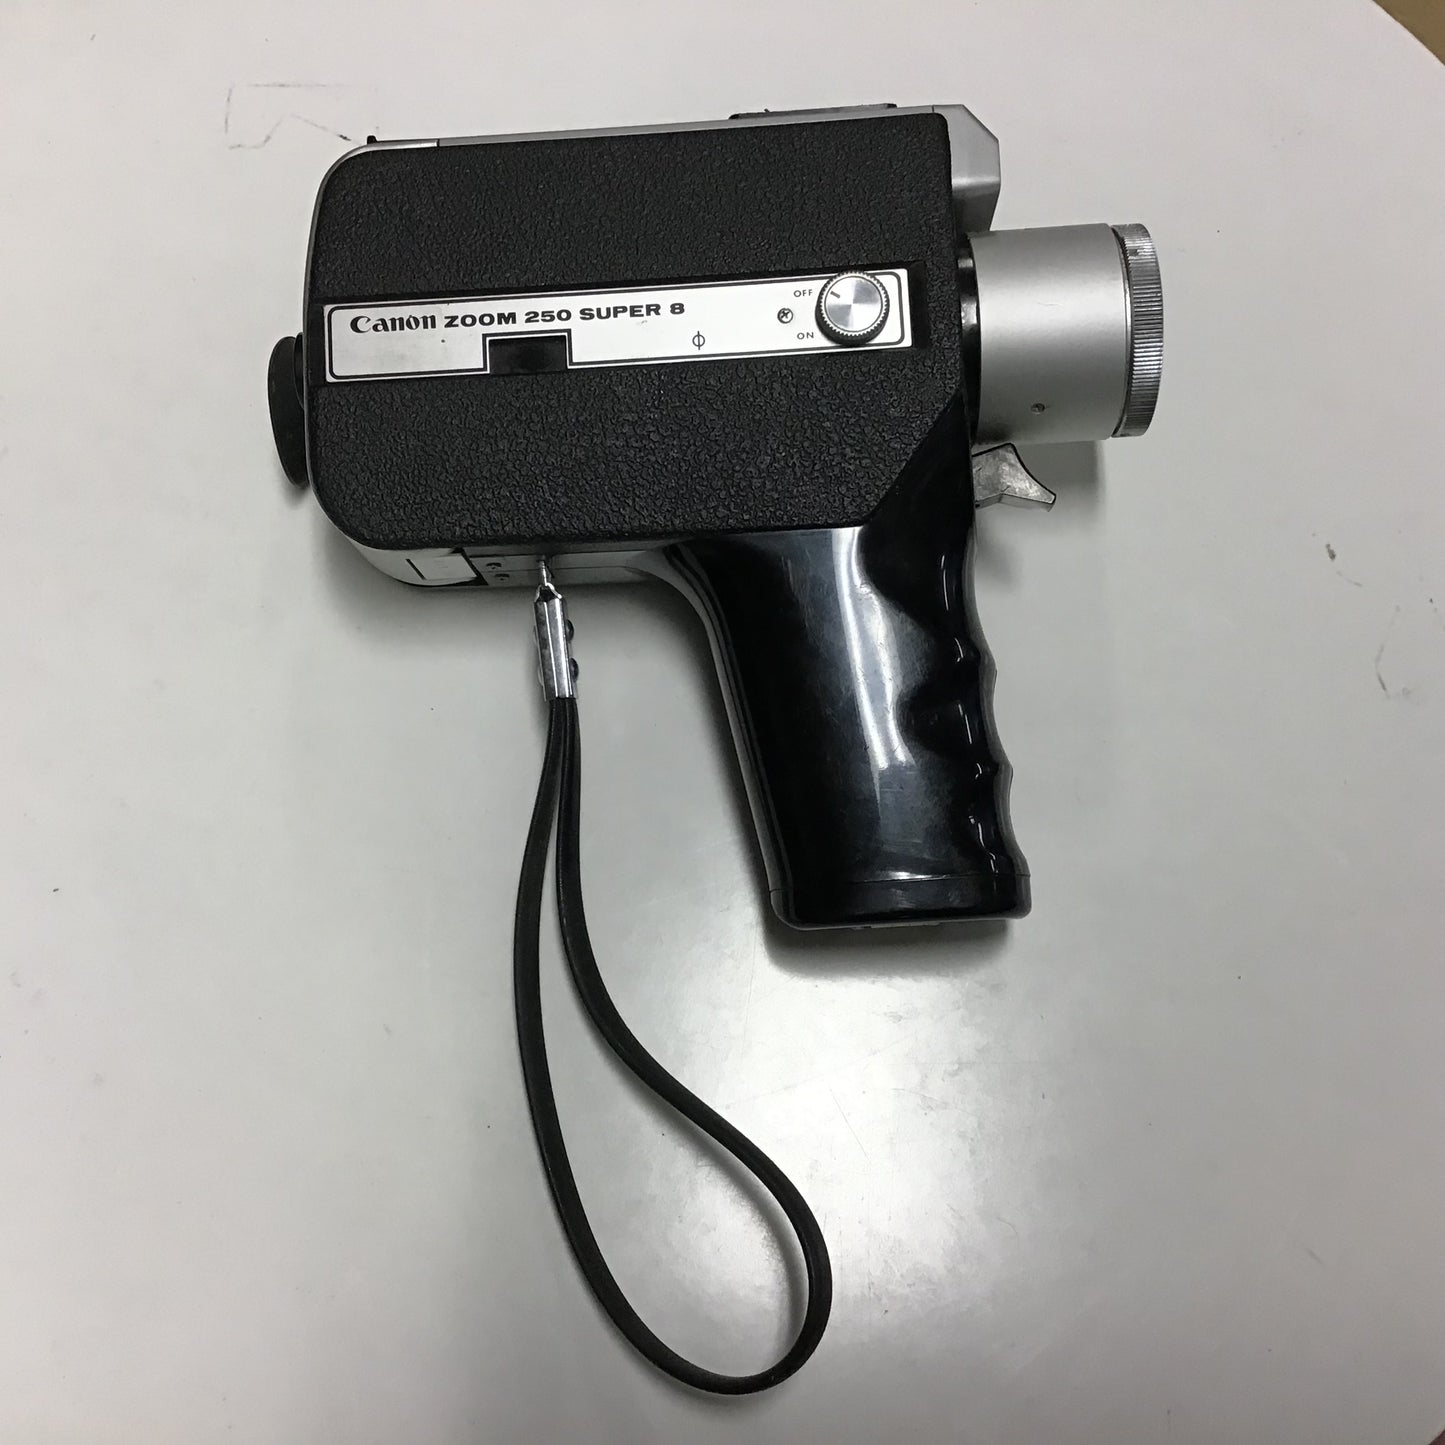 Canon Zoom 250 Super 8 [Untested, As-Is]